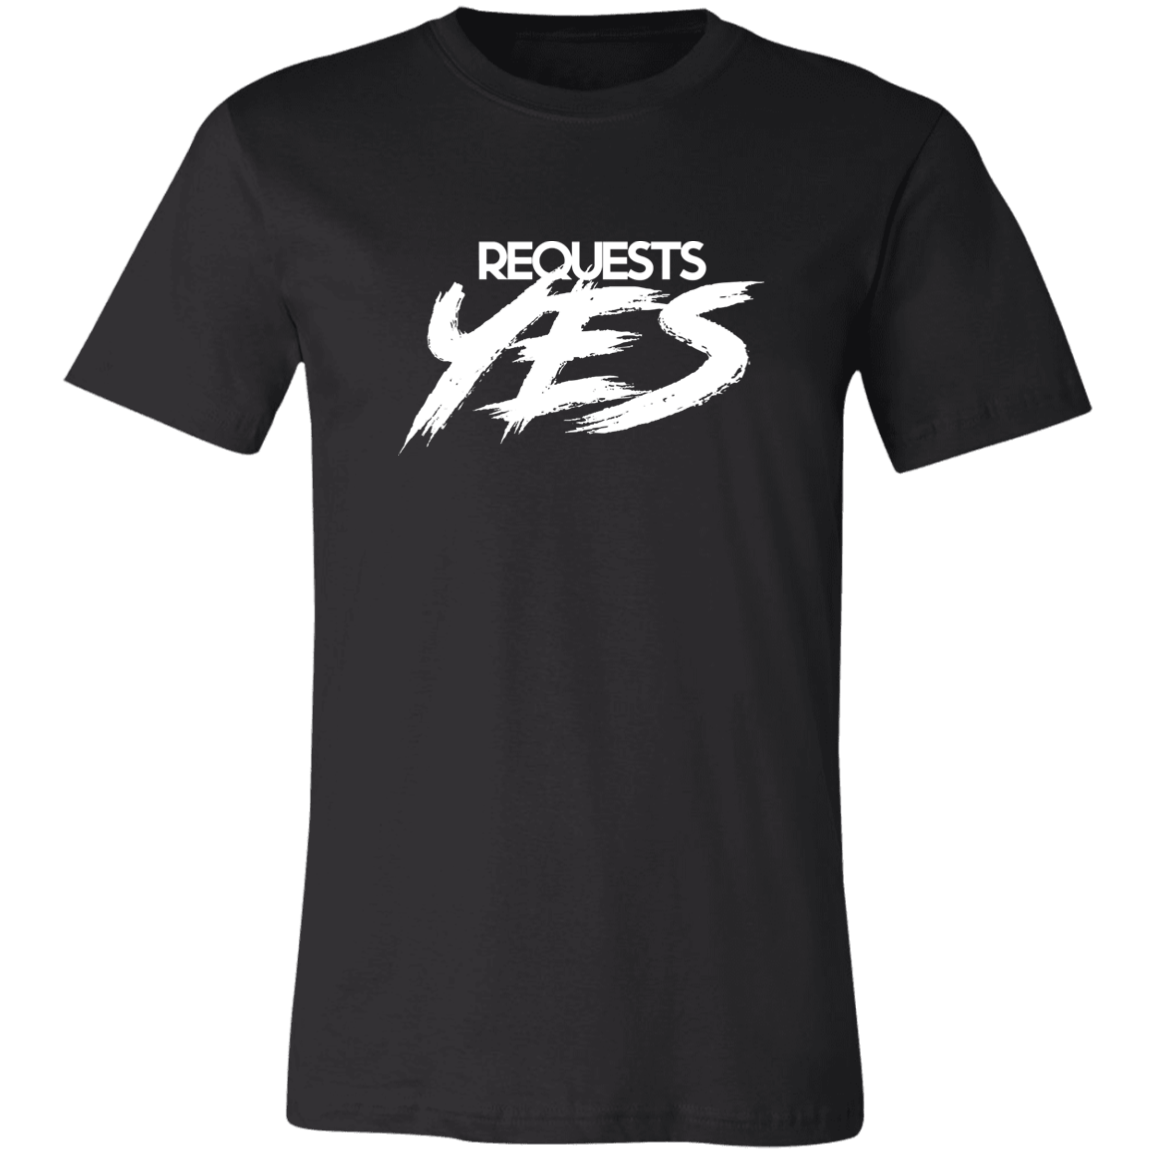 Requests? Yes / No T-shirt